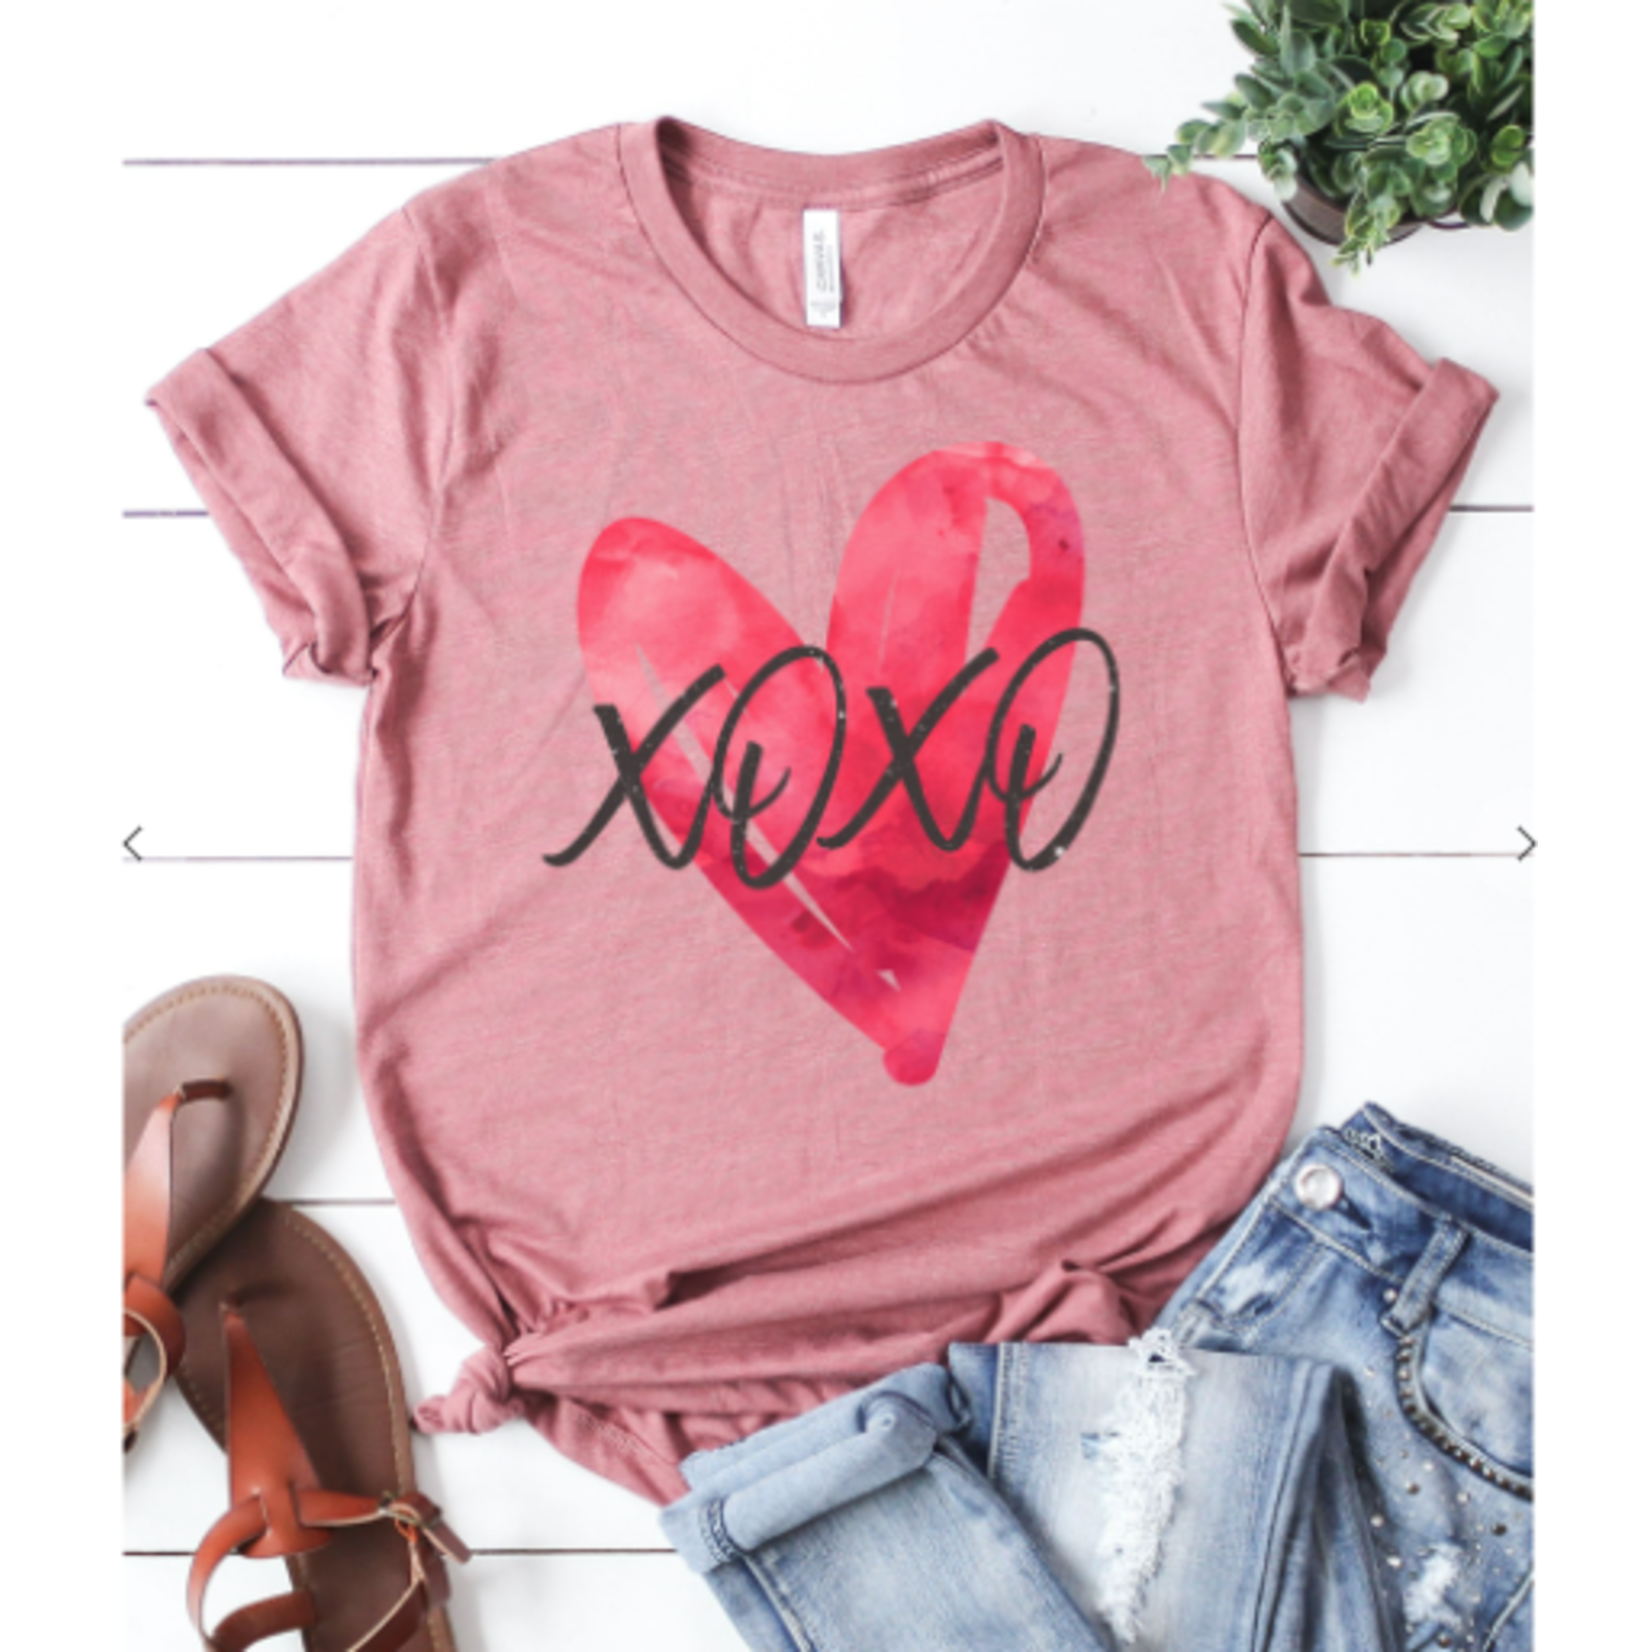 Kissed Apparel XOXO Heart Graphic T-Shirt M